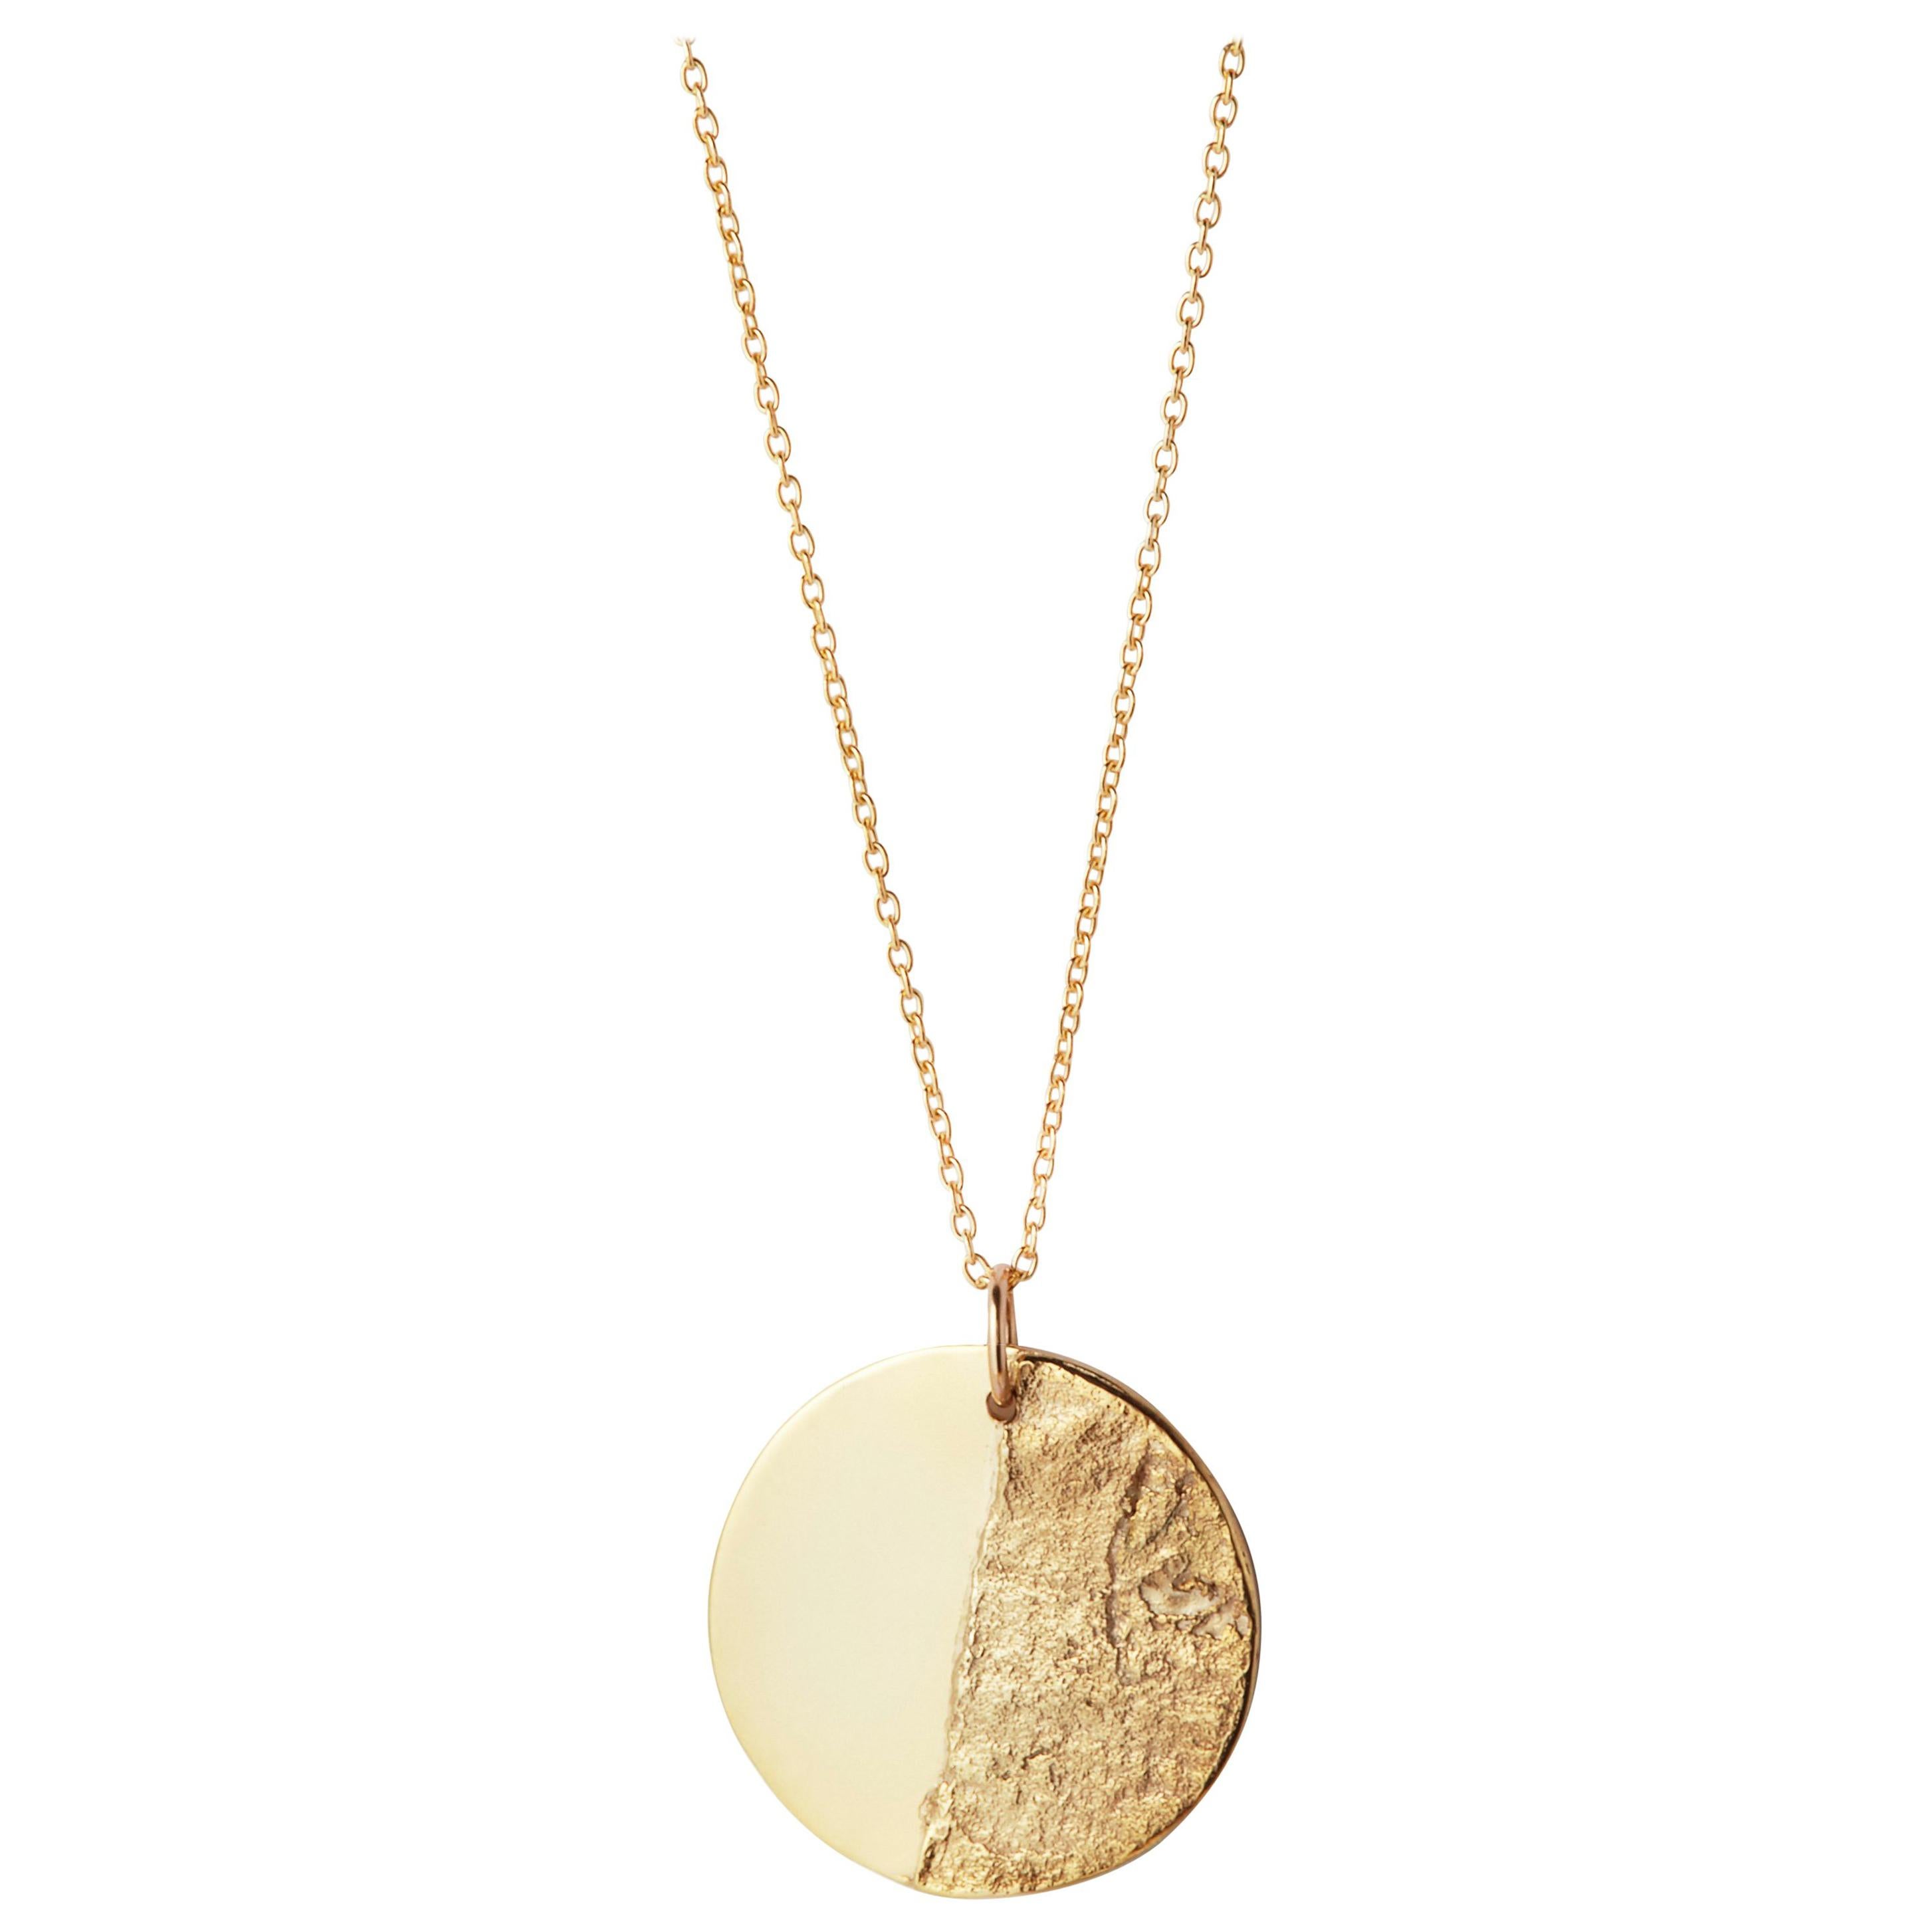 Split Disc Necklace in 9 Karat Yellow Gold by Allison Bryan For Sale